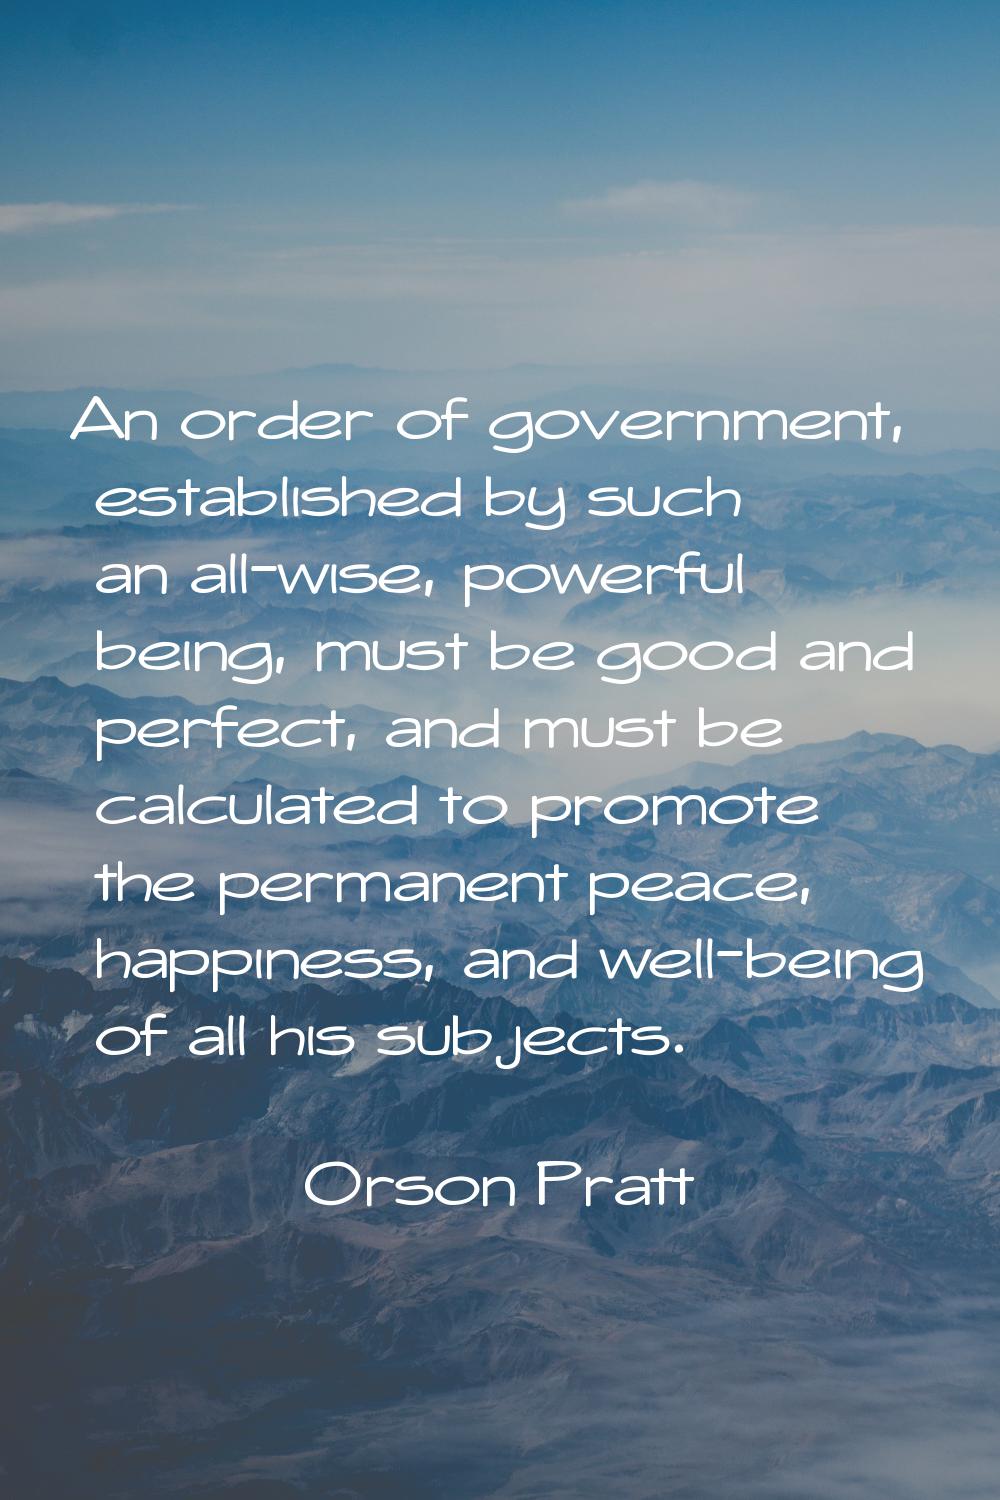 An order of government, established by such an all-wise, powerful being, must be good and perfect, 